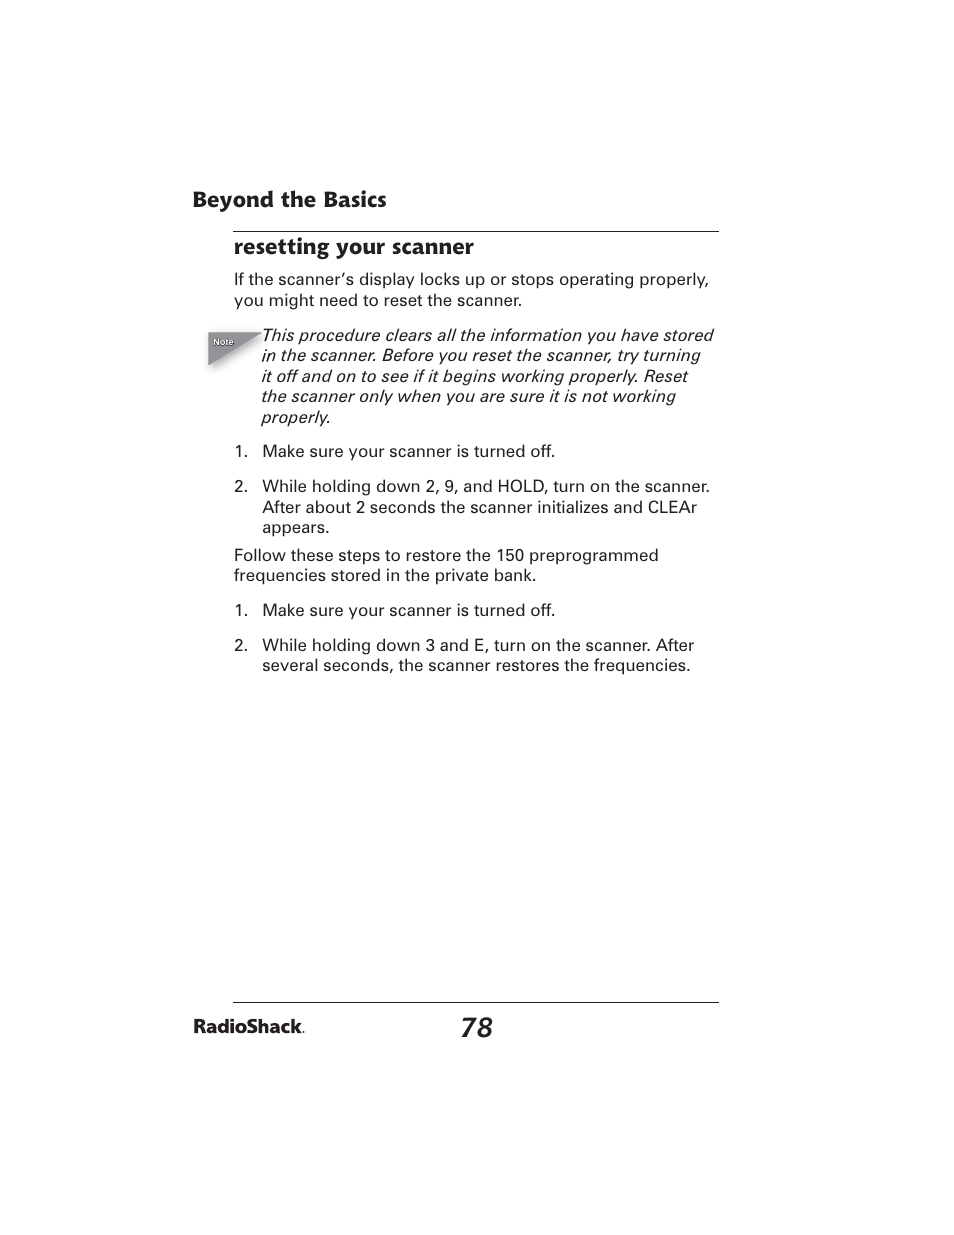 Beyond the basics resetting your scanner | Radio Shack PRO-2051 User Manual  | Page 78 / 84